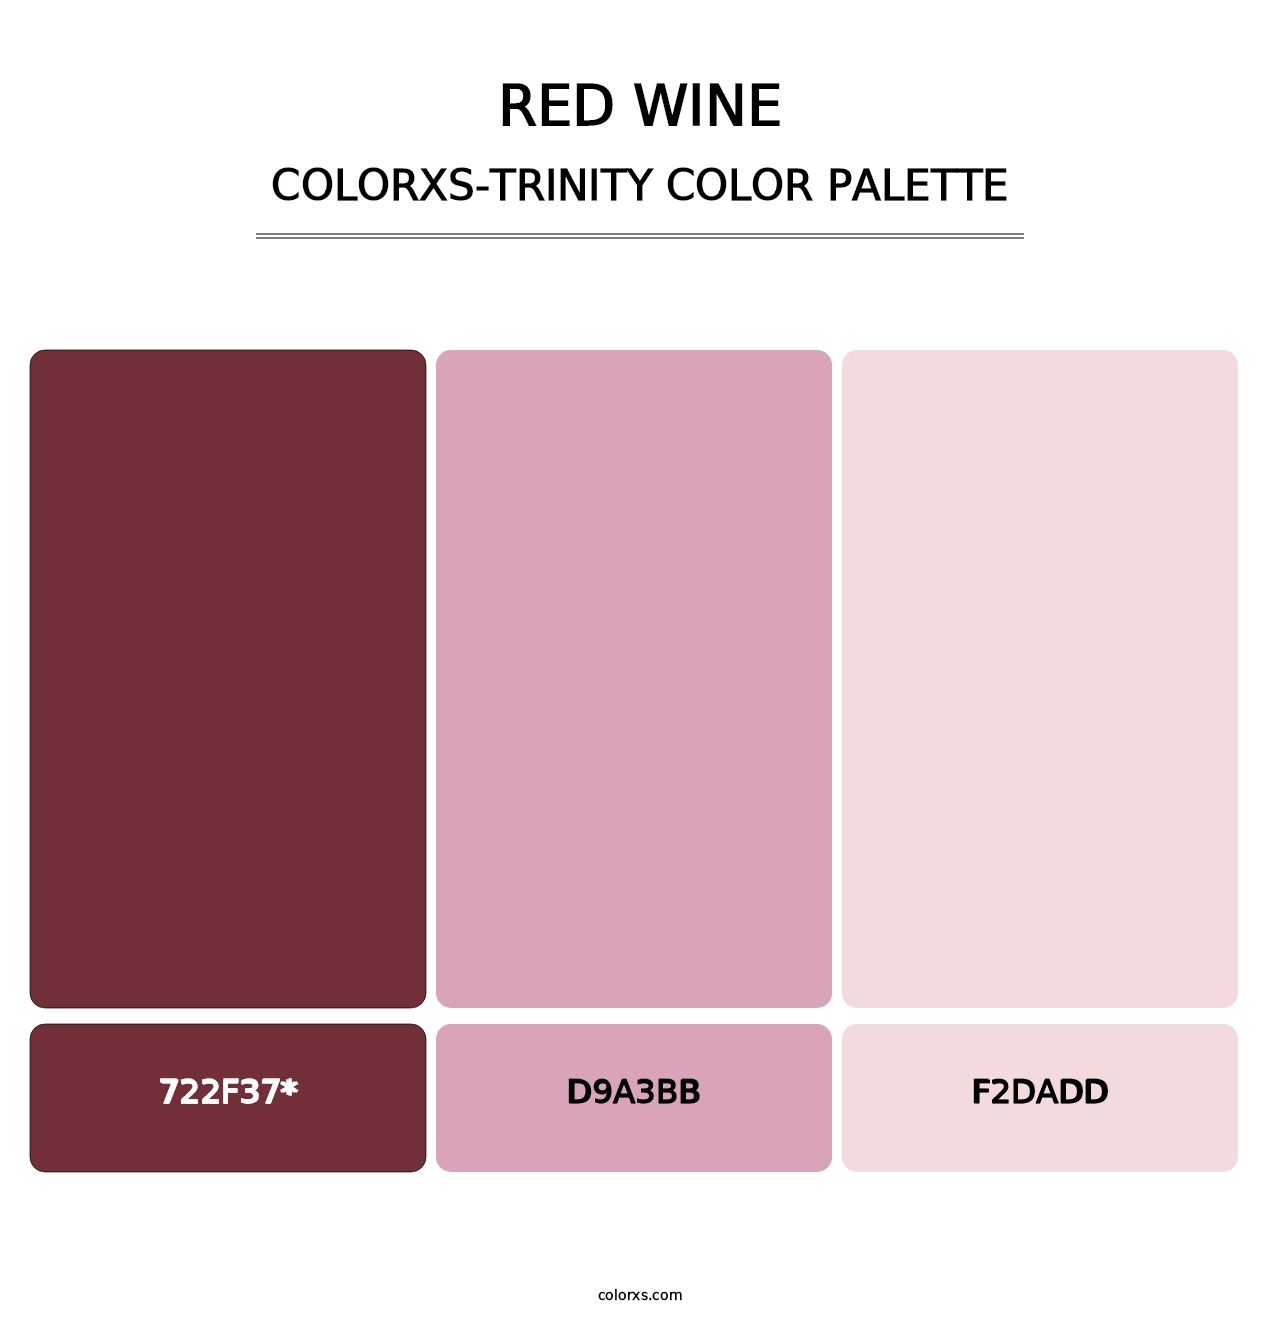 Red Wine - Colorxs Trinity Palette